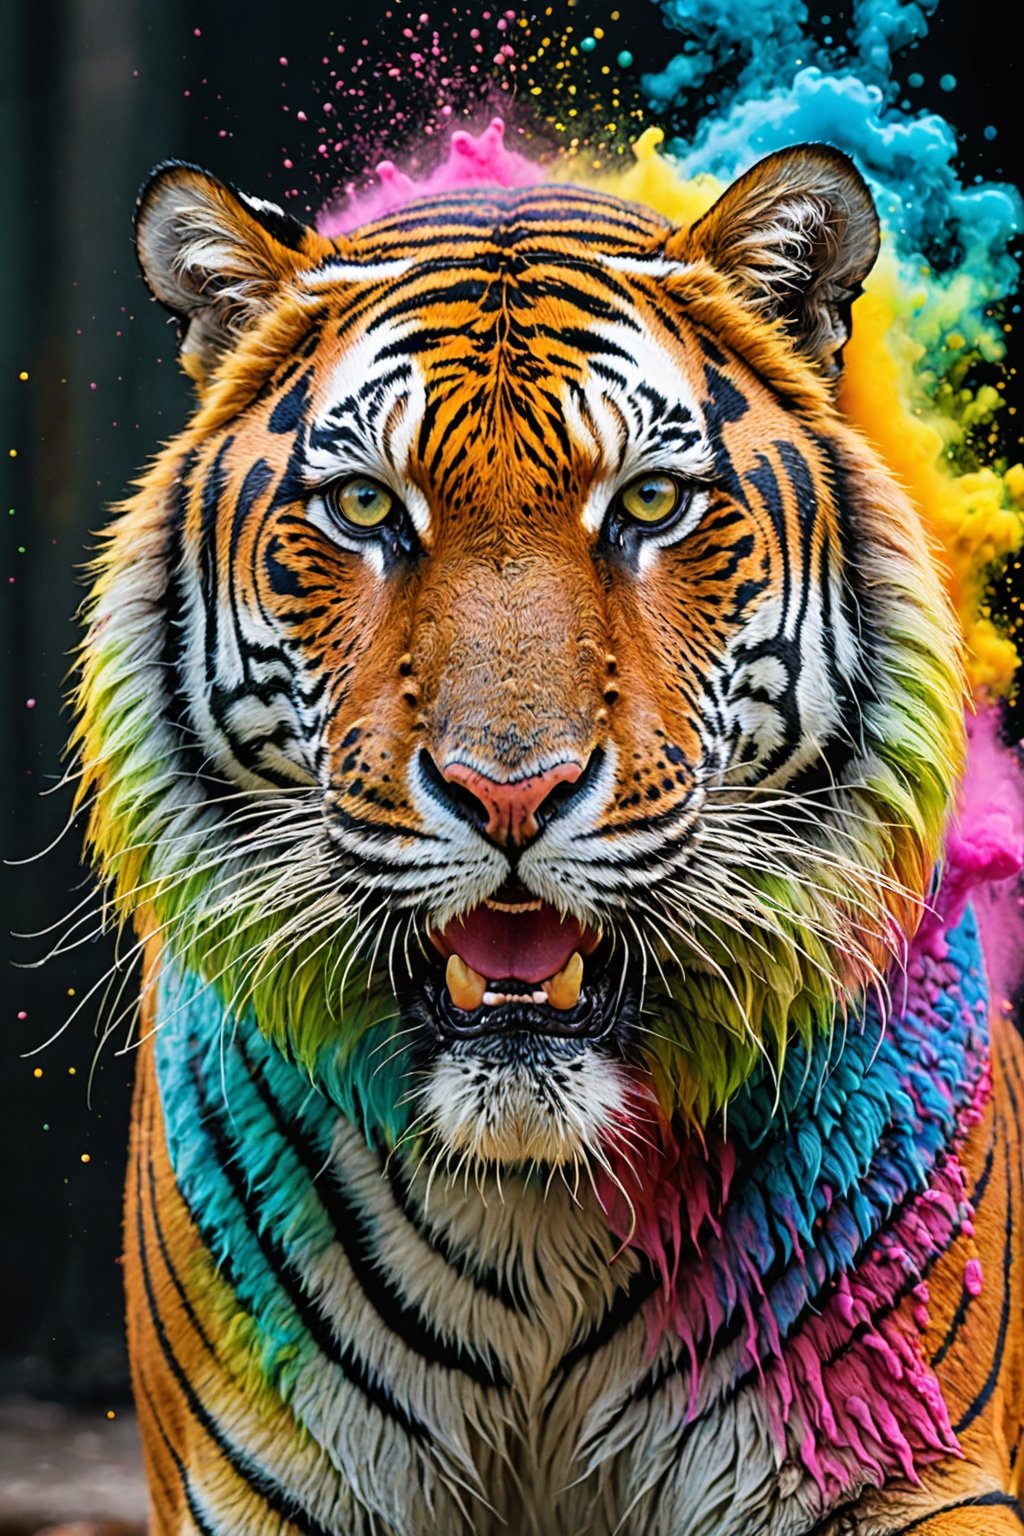 The appearance of colorful and colorful tiger.
The background shows rainbow-colored powder spreading like an explosion.
It is so ridiculous that it is hard to distinguish the front,

only asian dragon, Ultra close-up photography, Ultra-detailed, ultra-realistic, full body shot, 